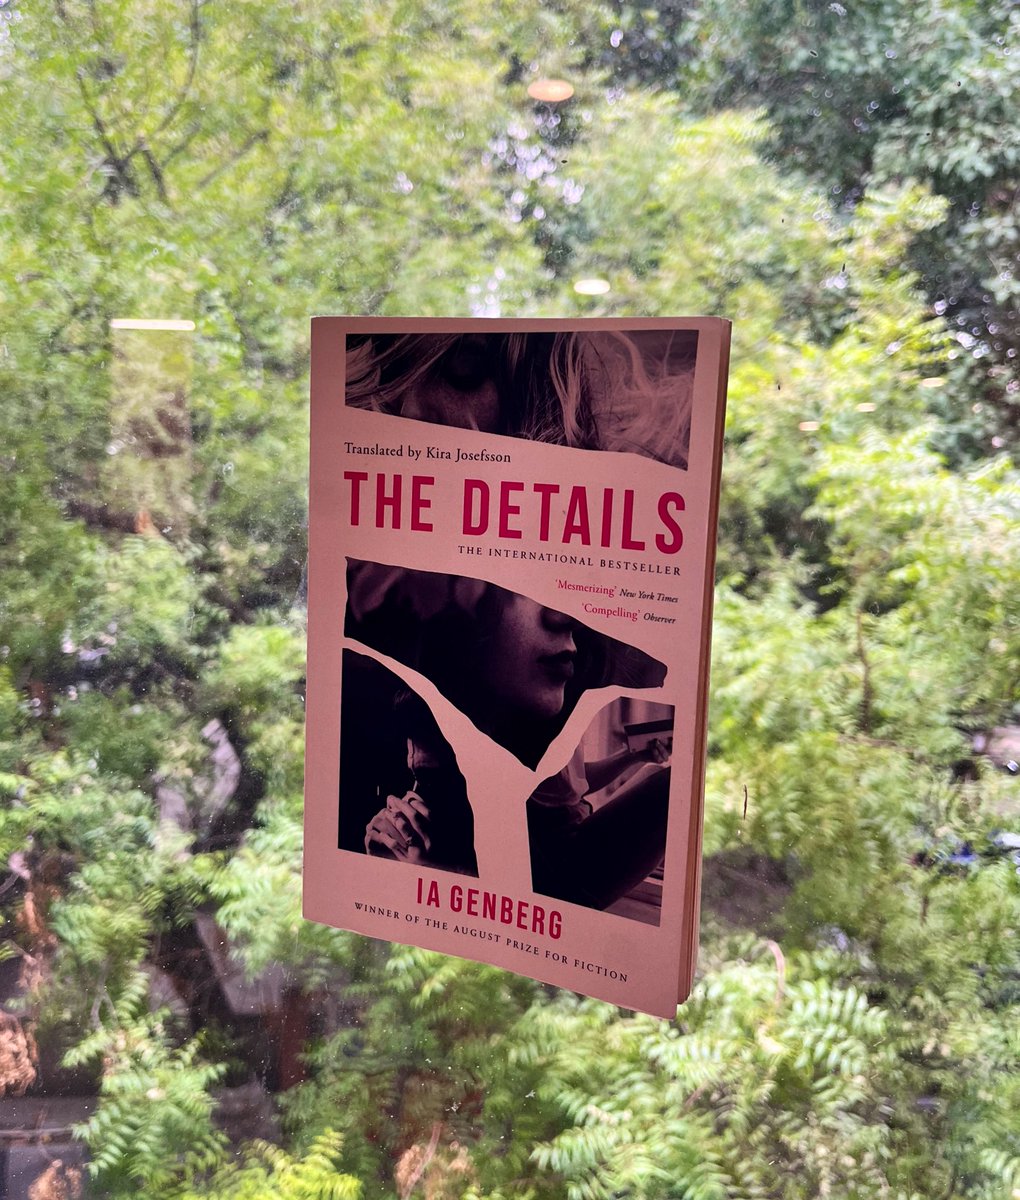 🫧For May, we are reading Ia Genberg’s The Details translated from the Swedish by @kiracecilia_, which is also on the International @TheBookerprizes shortlist!🫧

Members can get discounted copies from @midlandbook 🐡

#InternationalBookerPrize